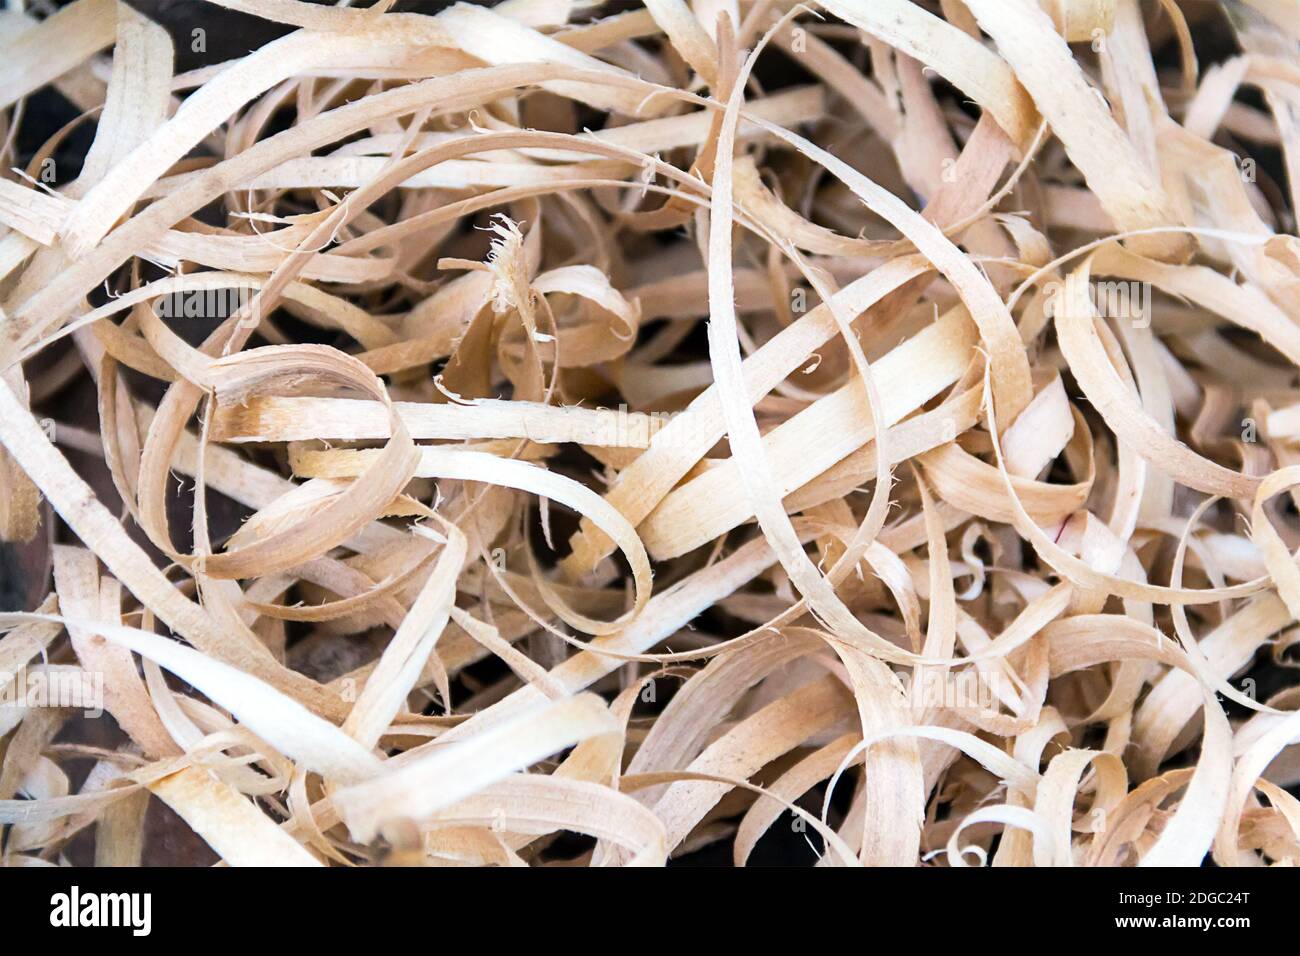 Wood shavings long beige strips residues of manufactures Stock Photo